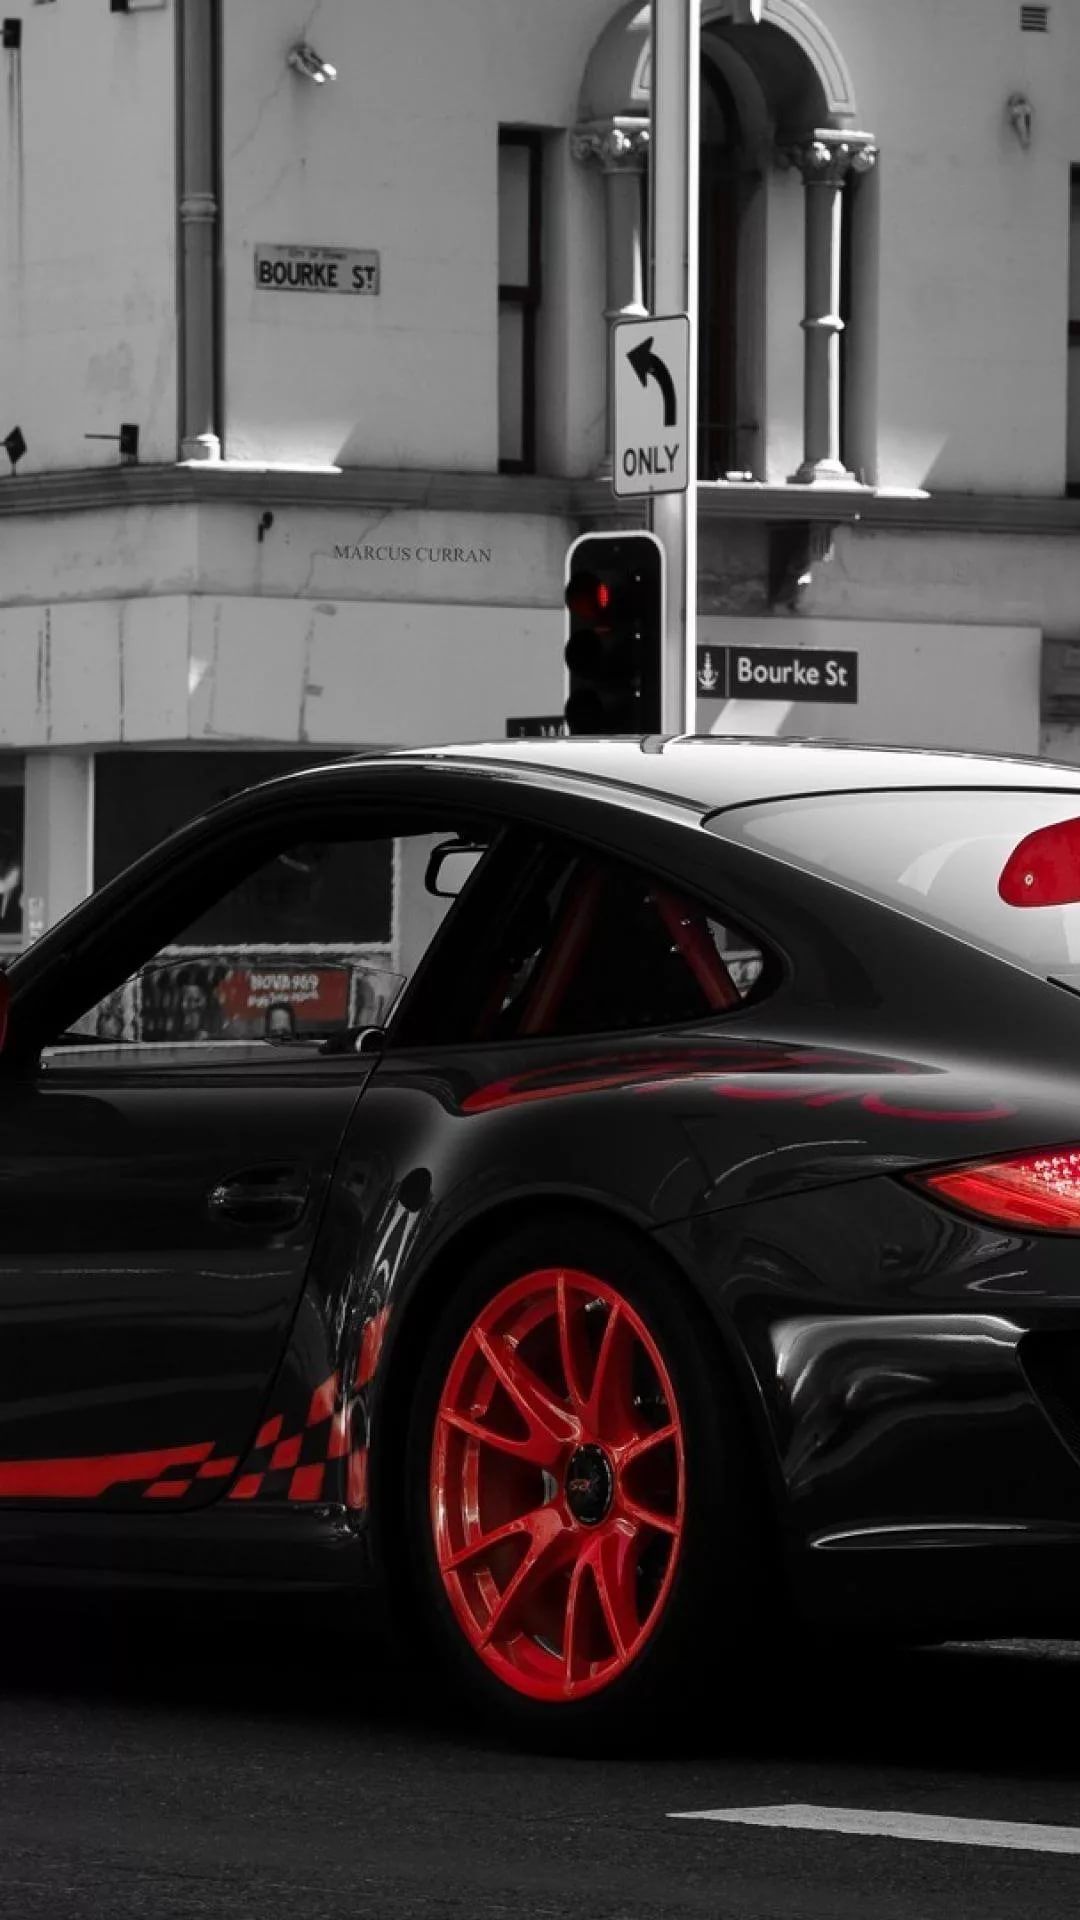 Porsche Gt3 Rs wallpaper for android